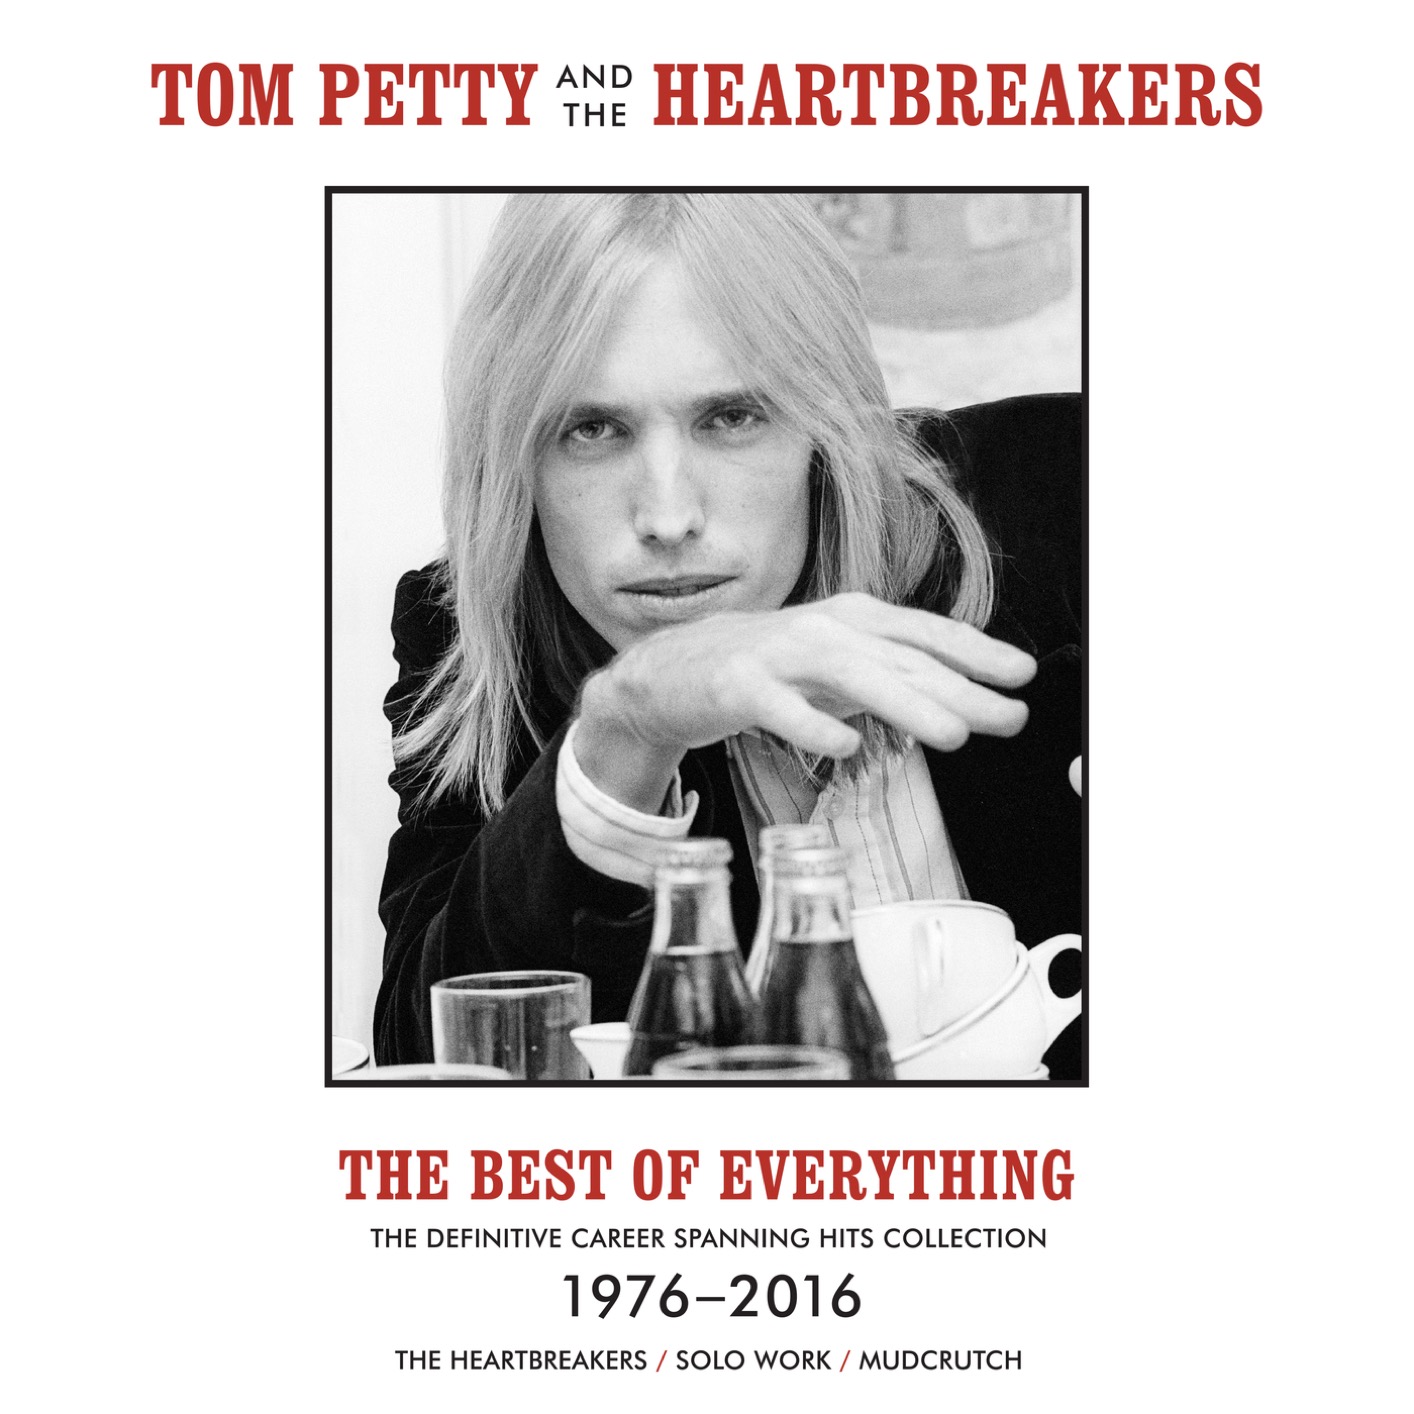 Tom Petty - The Best Of Everything - The Definitive Career Spanning Hits Collection 1976-2016 (2019) [FLAC 24bit/96kHz]